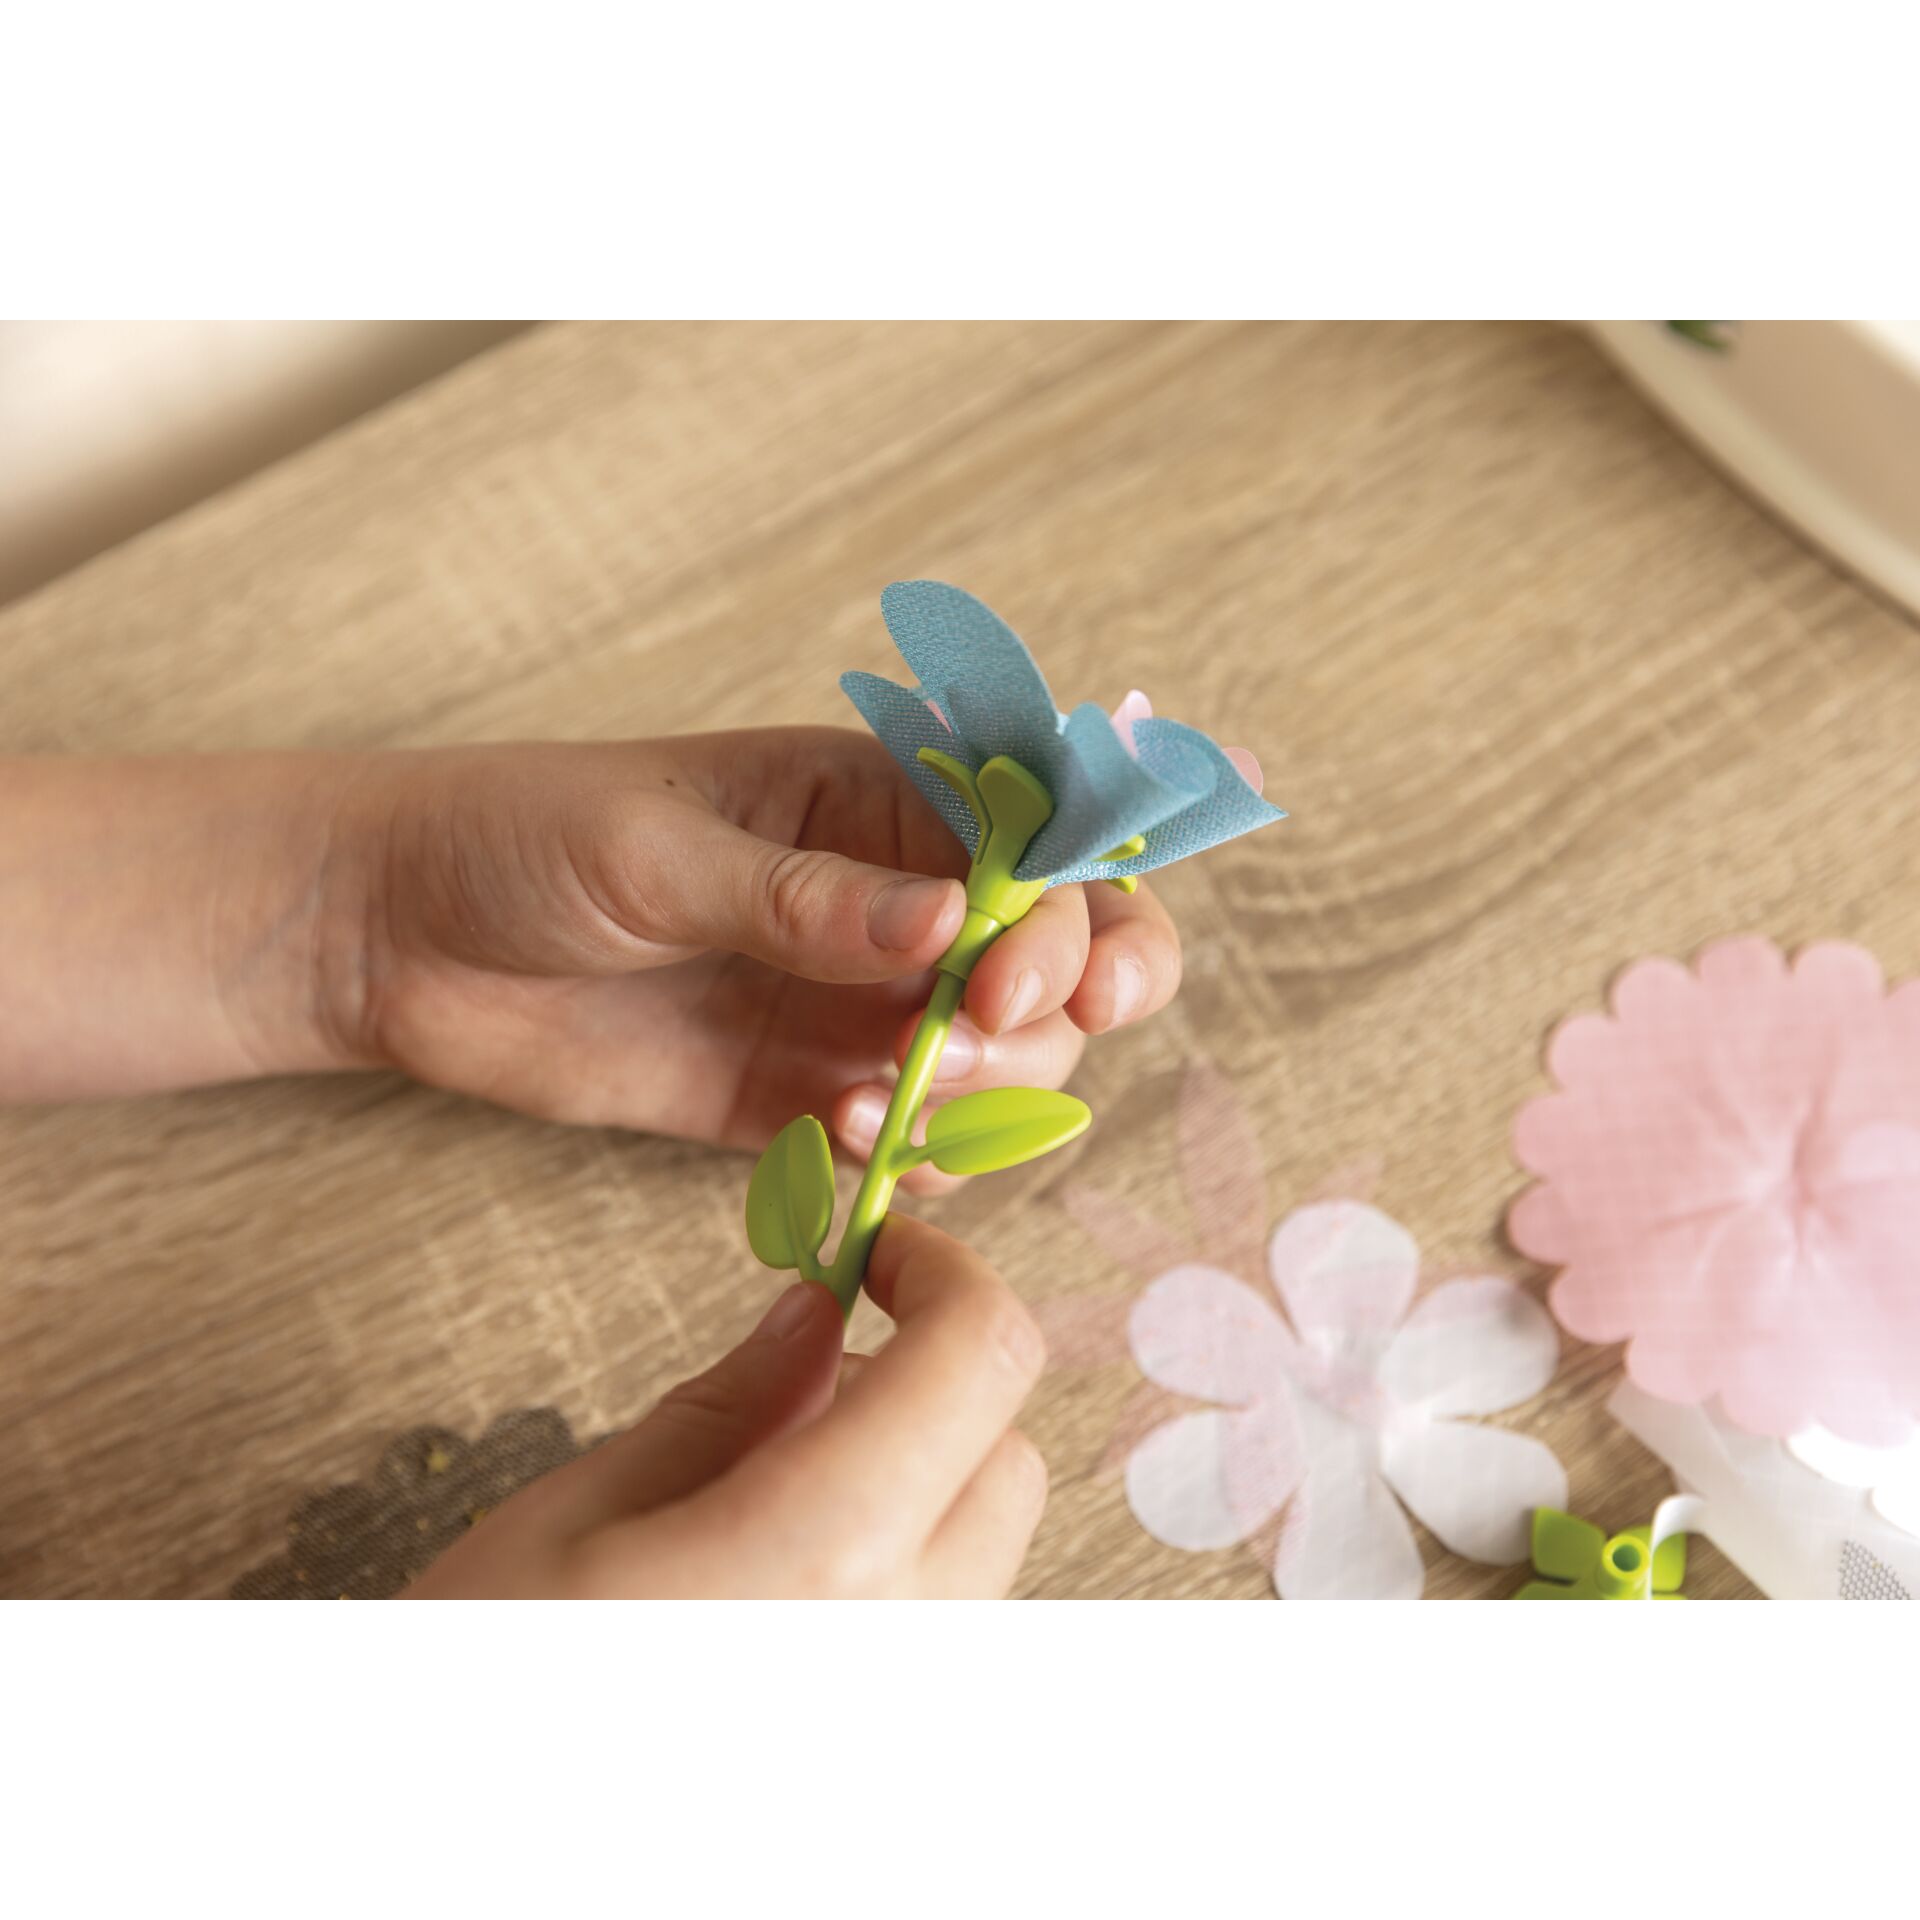 SMOBY FLOWER MARKET – Table top flower market with accessories to make  beautiful flowers - educational interactive gift for children from ages 3 4  5 6 7 years old : : Toys & Games